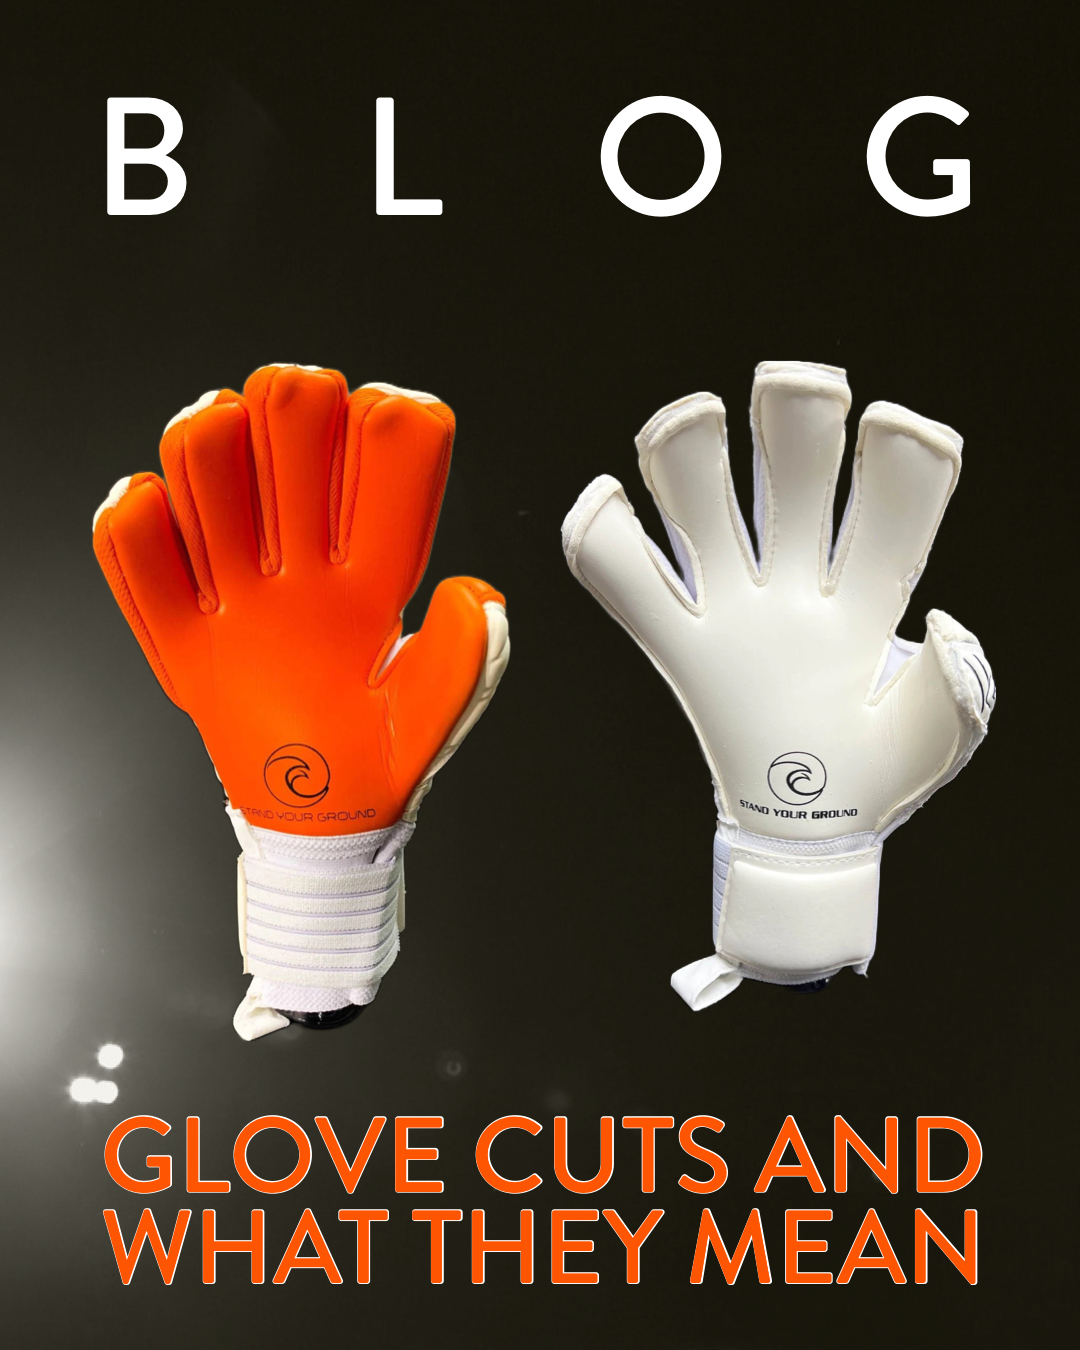 GLOVE CUTS AND WHAT THEY MEAN